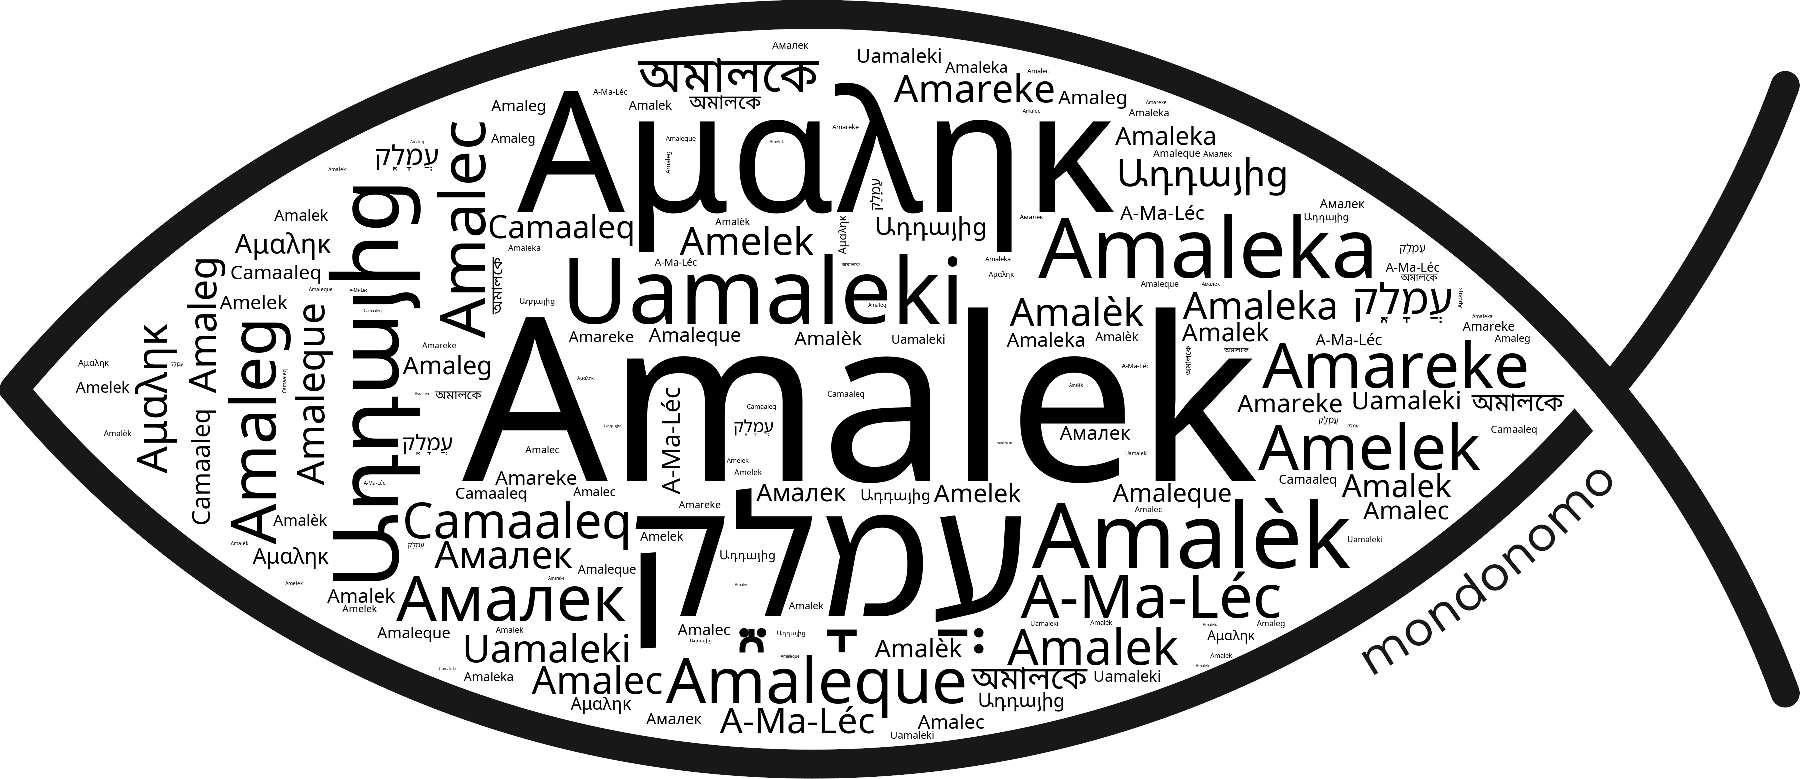 Name Amalek in the world's Bibles